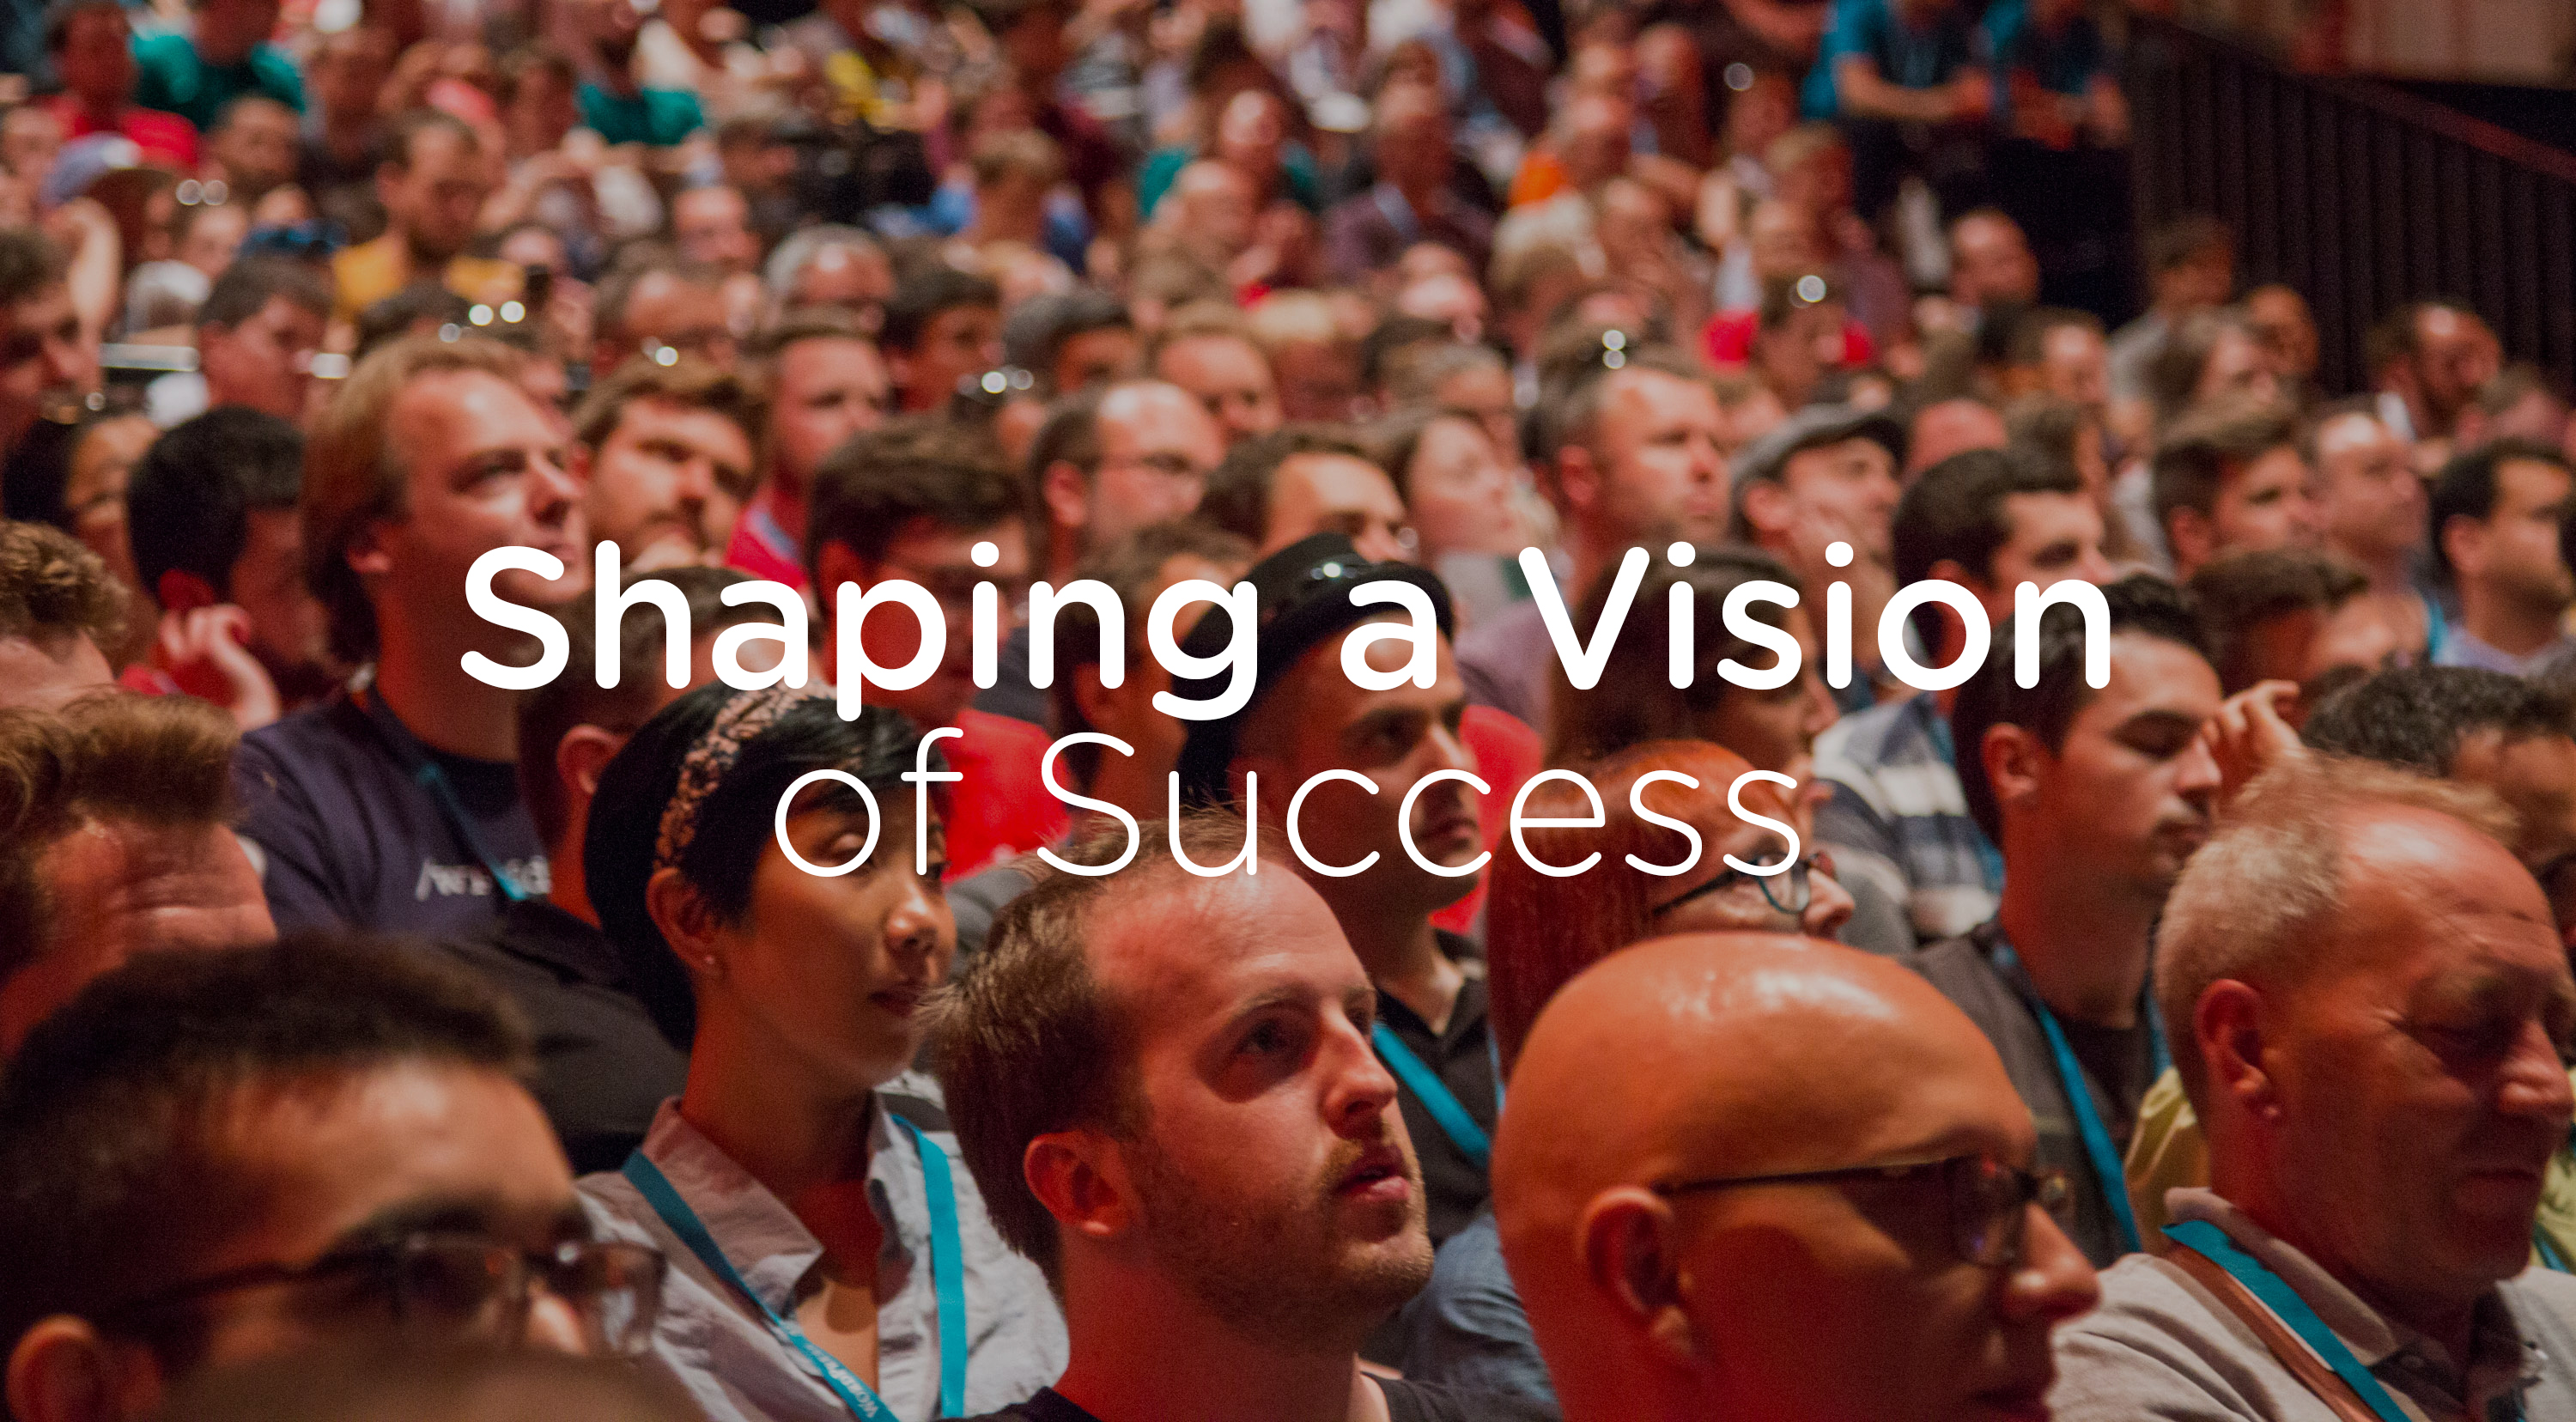 Shaping a vision of success